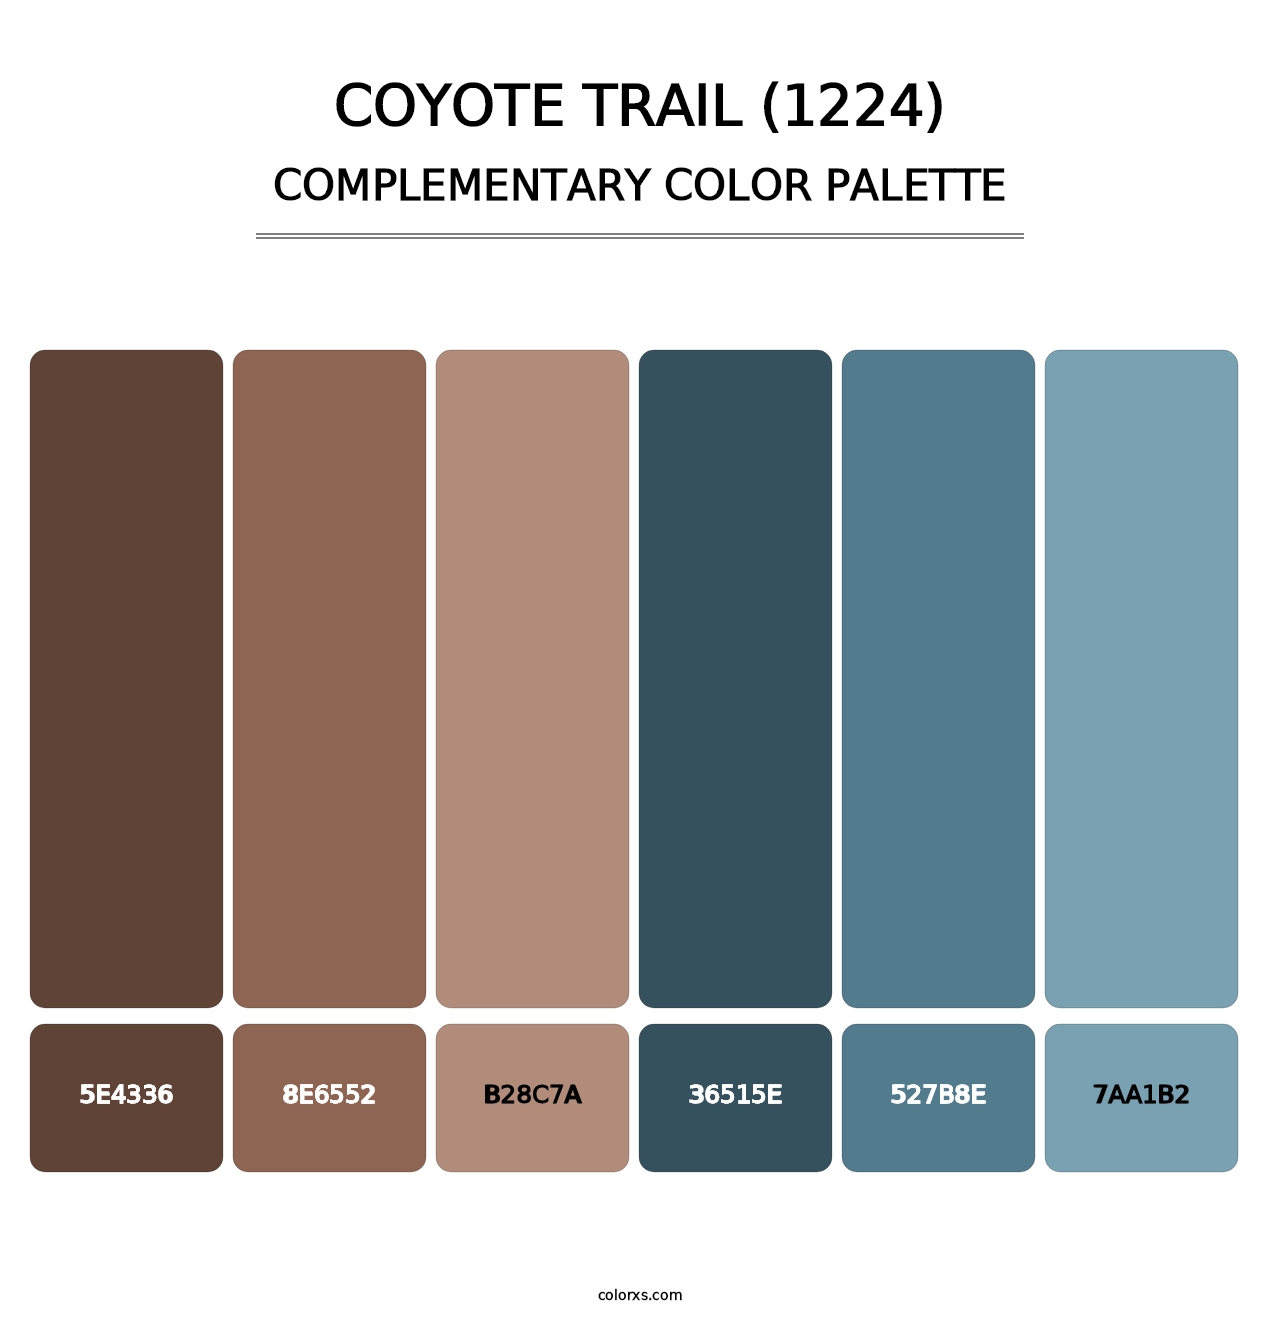 Coyote Trail (1224) - Complementary Color Palette